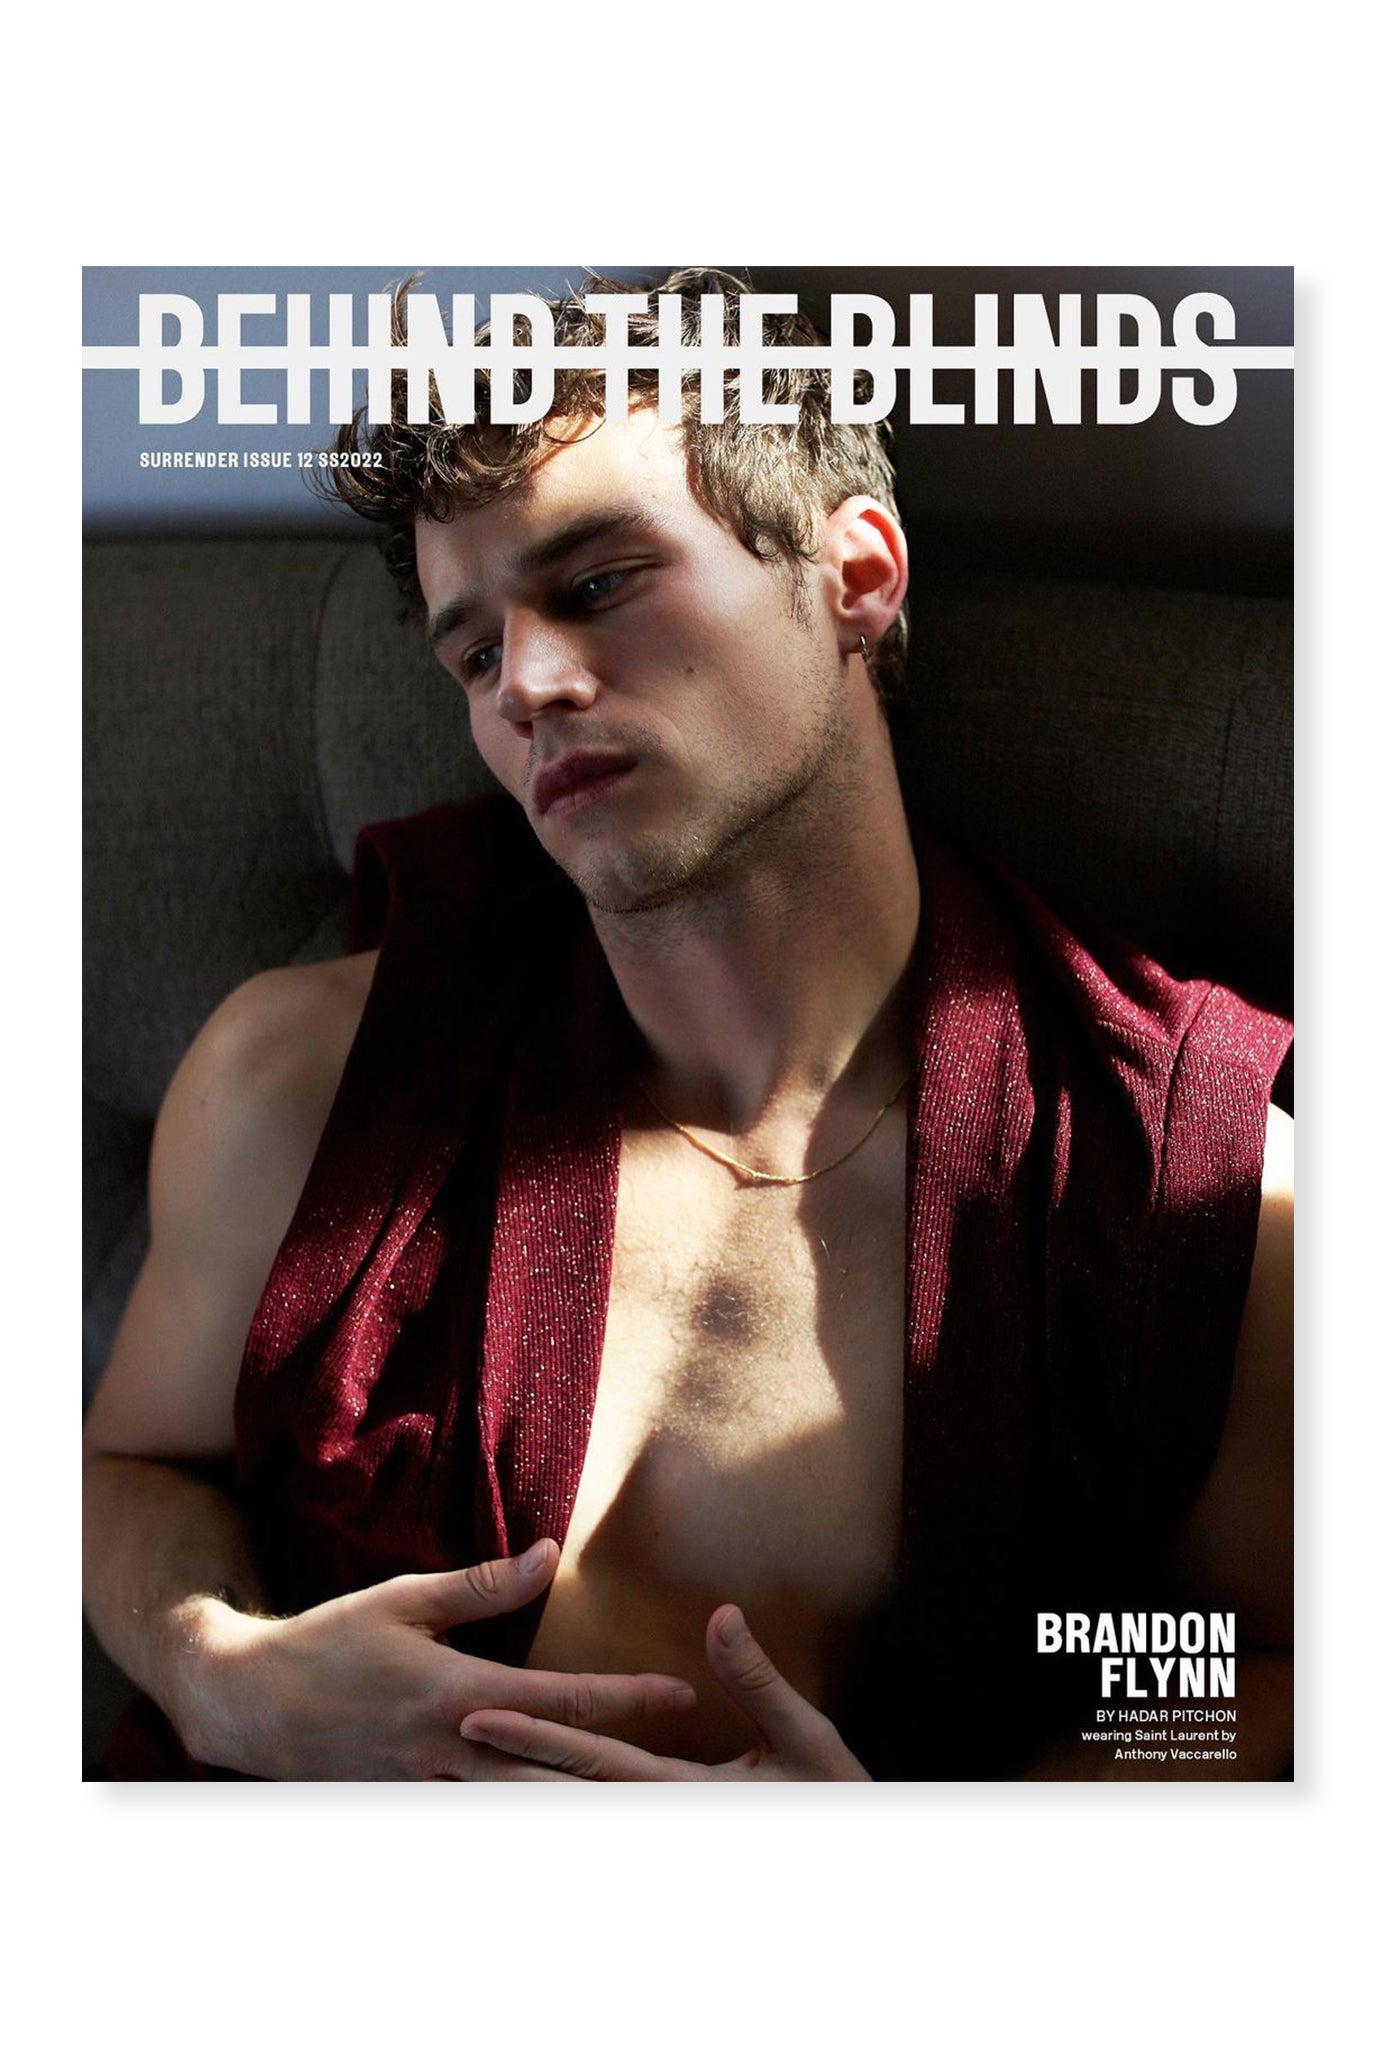 Behind The Blinds, Issue 12